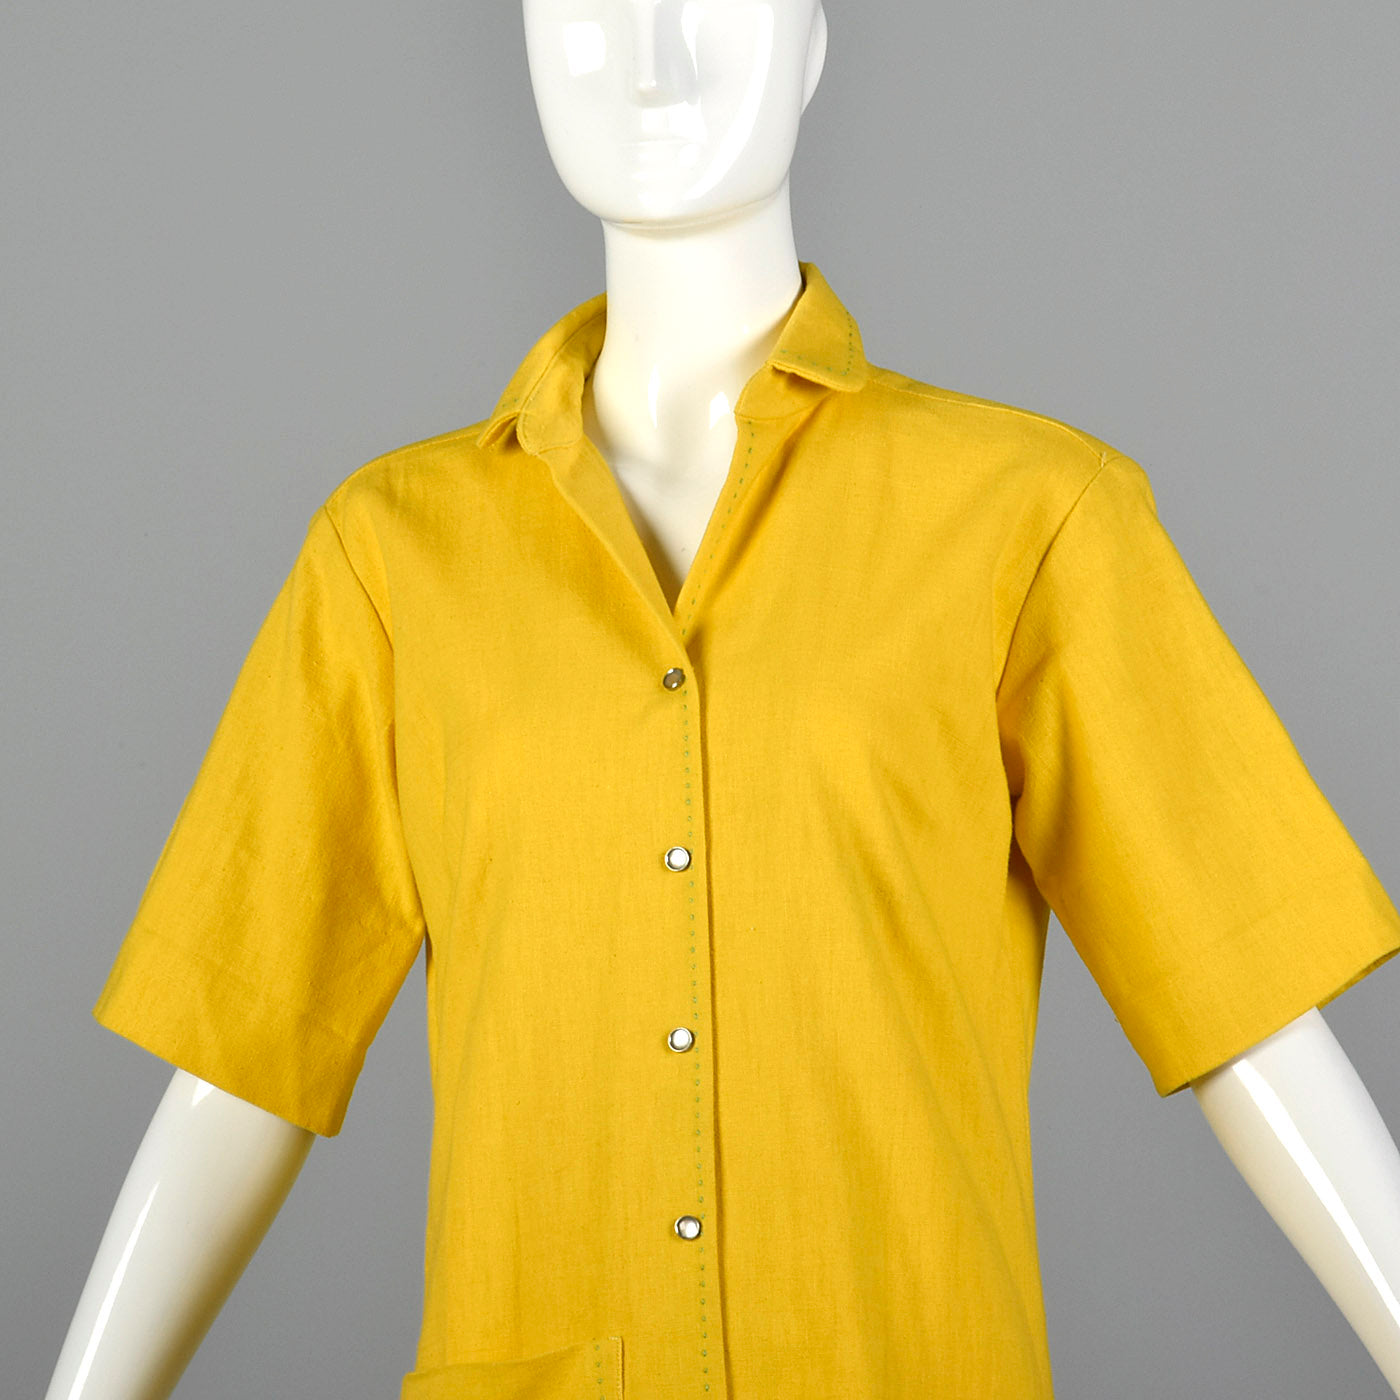 1960s Yellow Dress with Green Topstitch